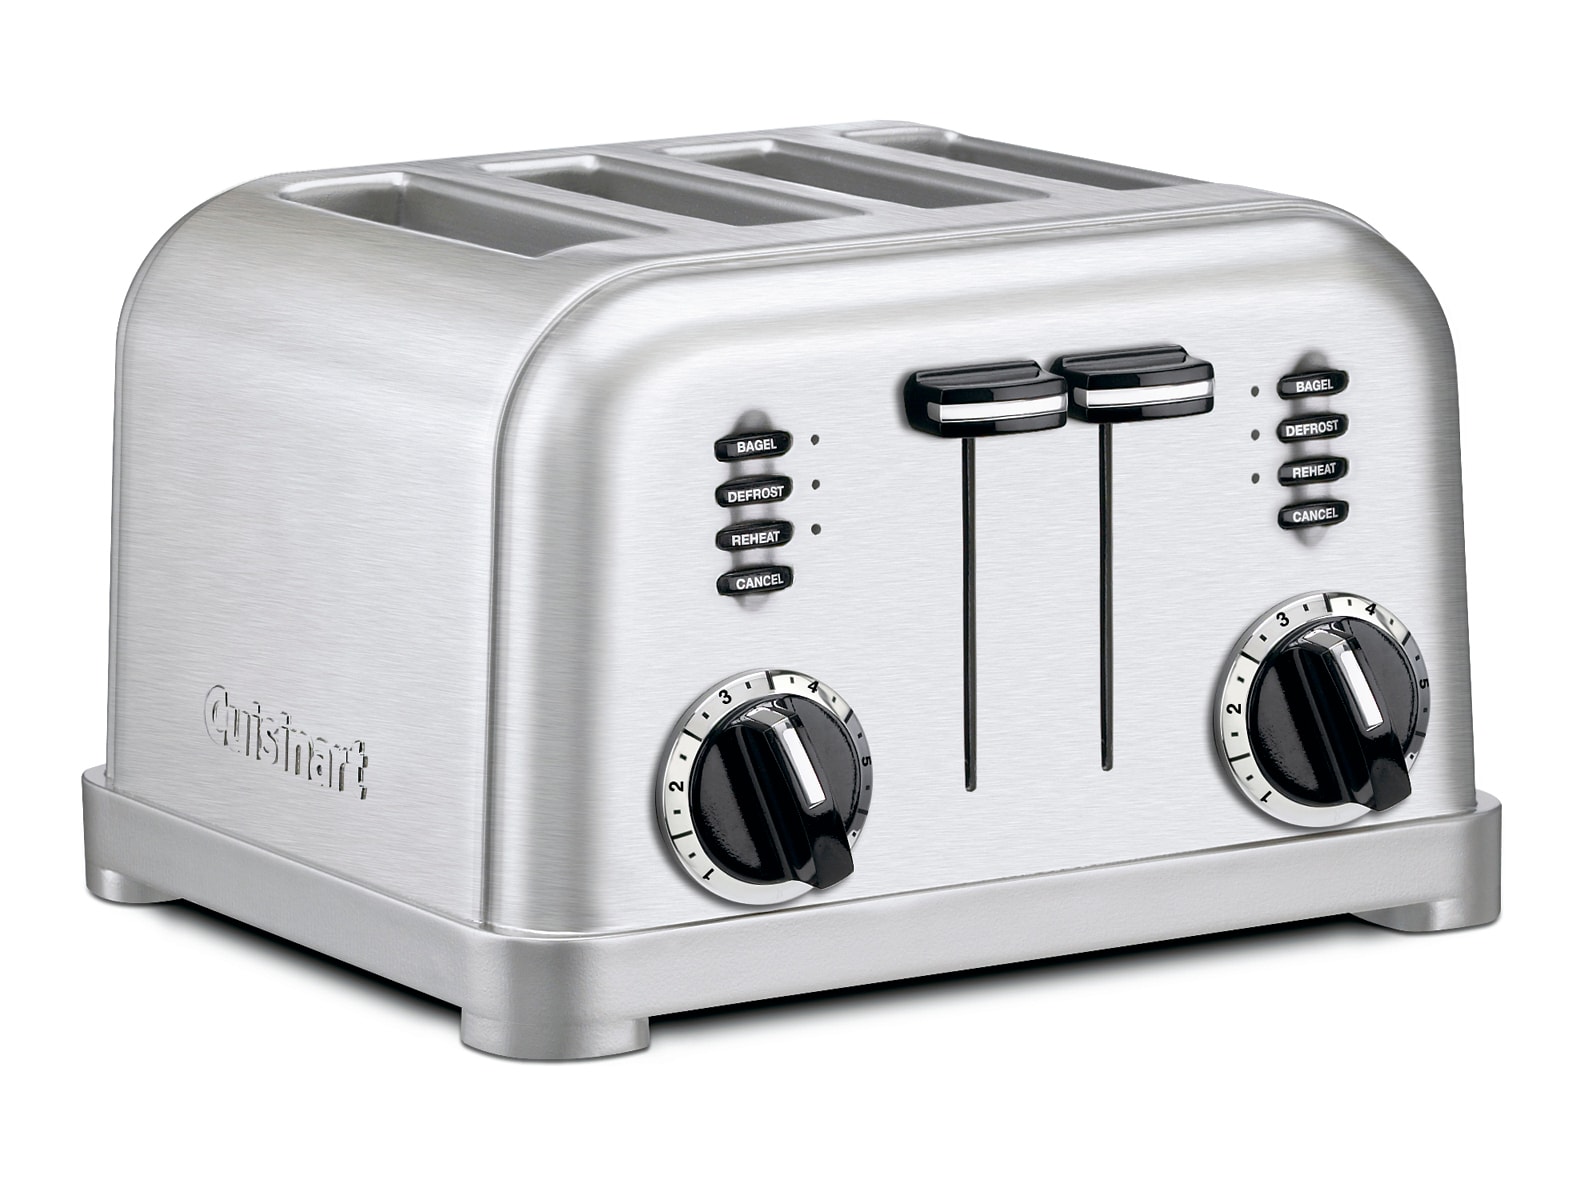  Cuisinart CPT-320P1 Compact 2-Slice Toaster, Brushed